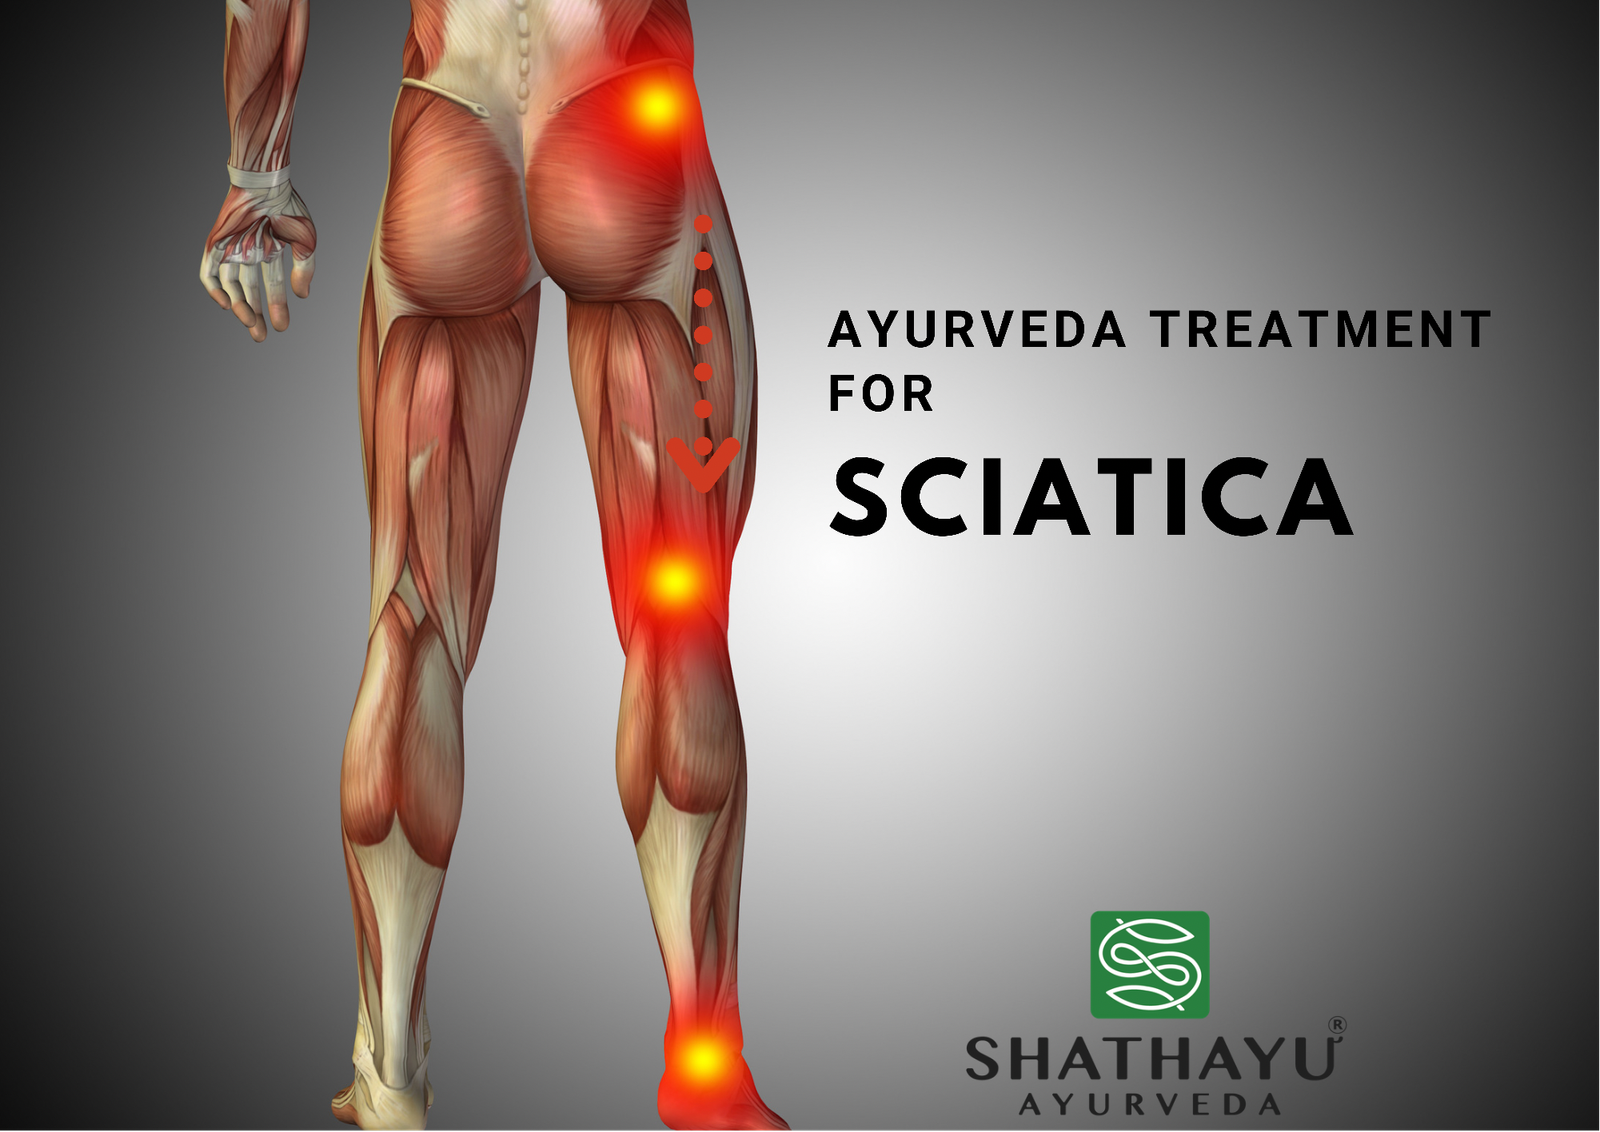 5 Best Home Remedies To Ease Sciatica Pain